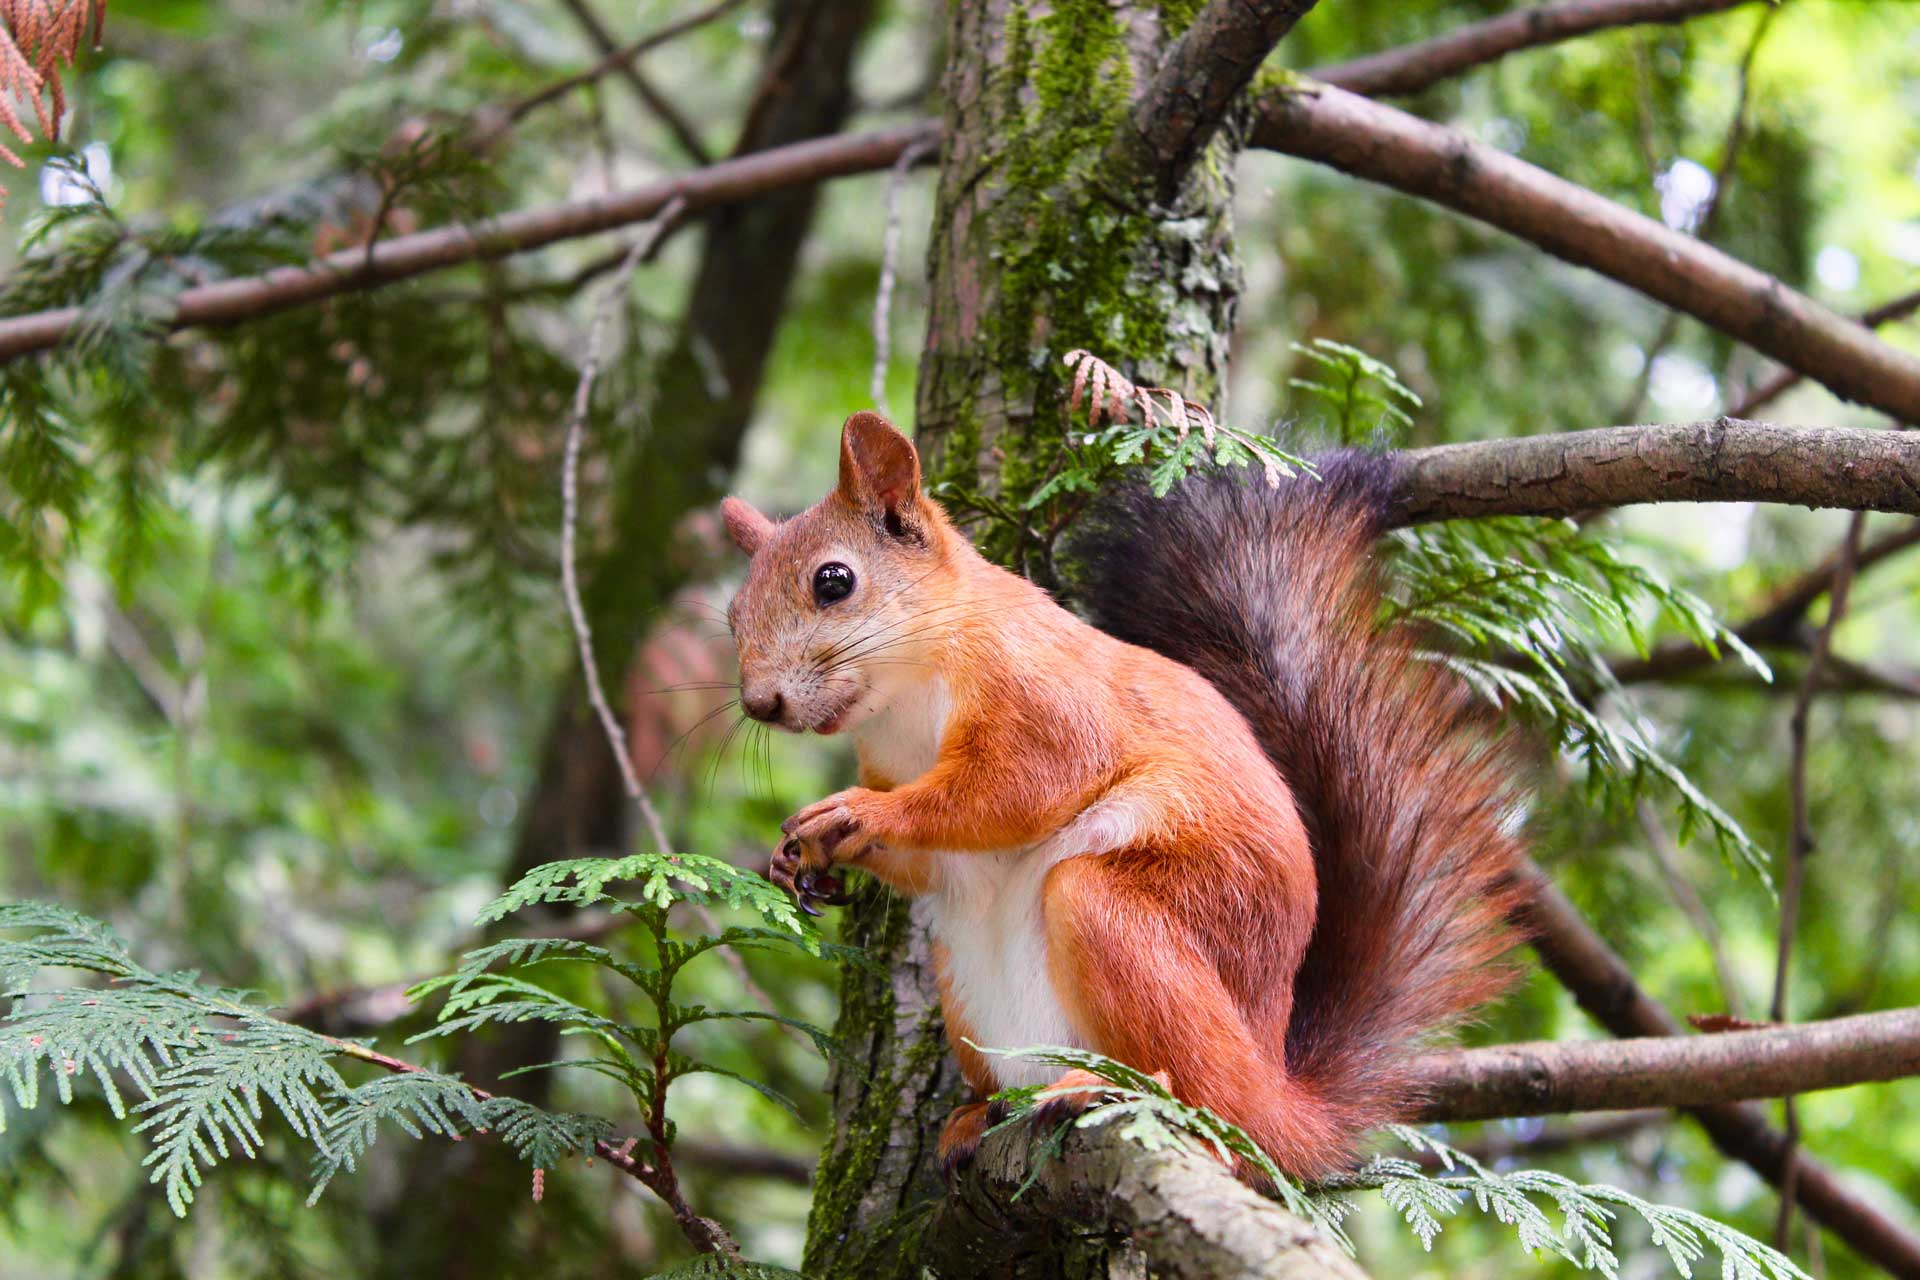 Our most famous residents are our Red Squirrels at Birchbrae Highland Lodges, nr Glencoe & Fort William. The grounds are alive with wildlife.